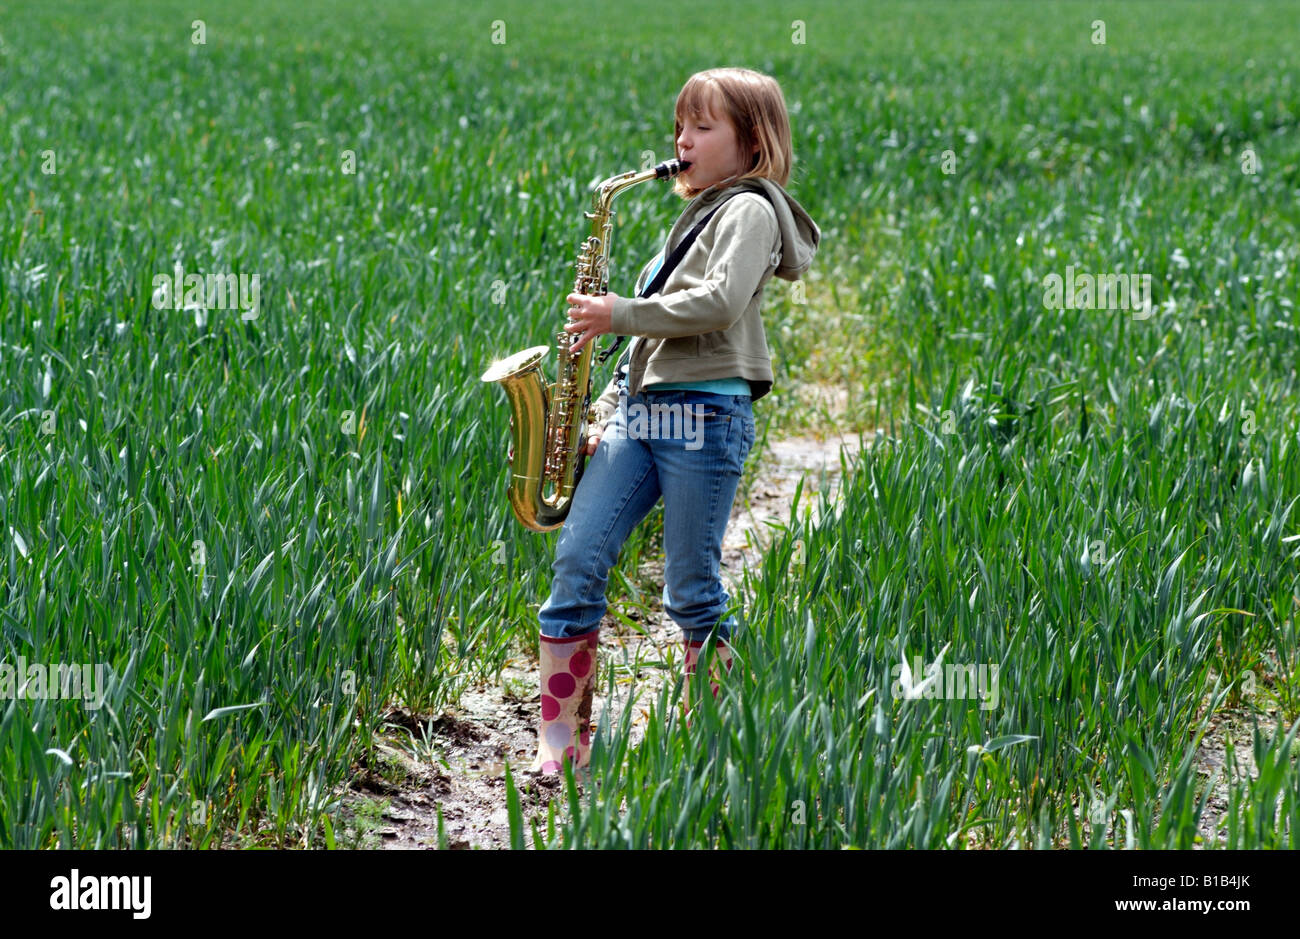 Little girl playing the saxophone in a field of crops Walking through the English countryside Stock Photo